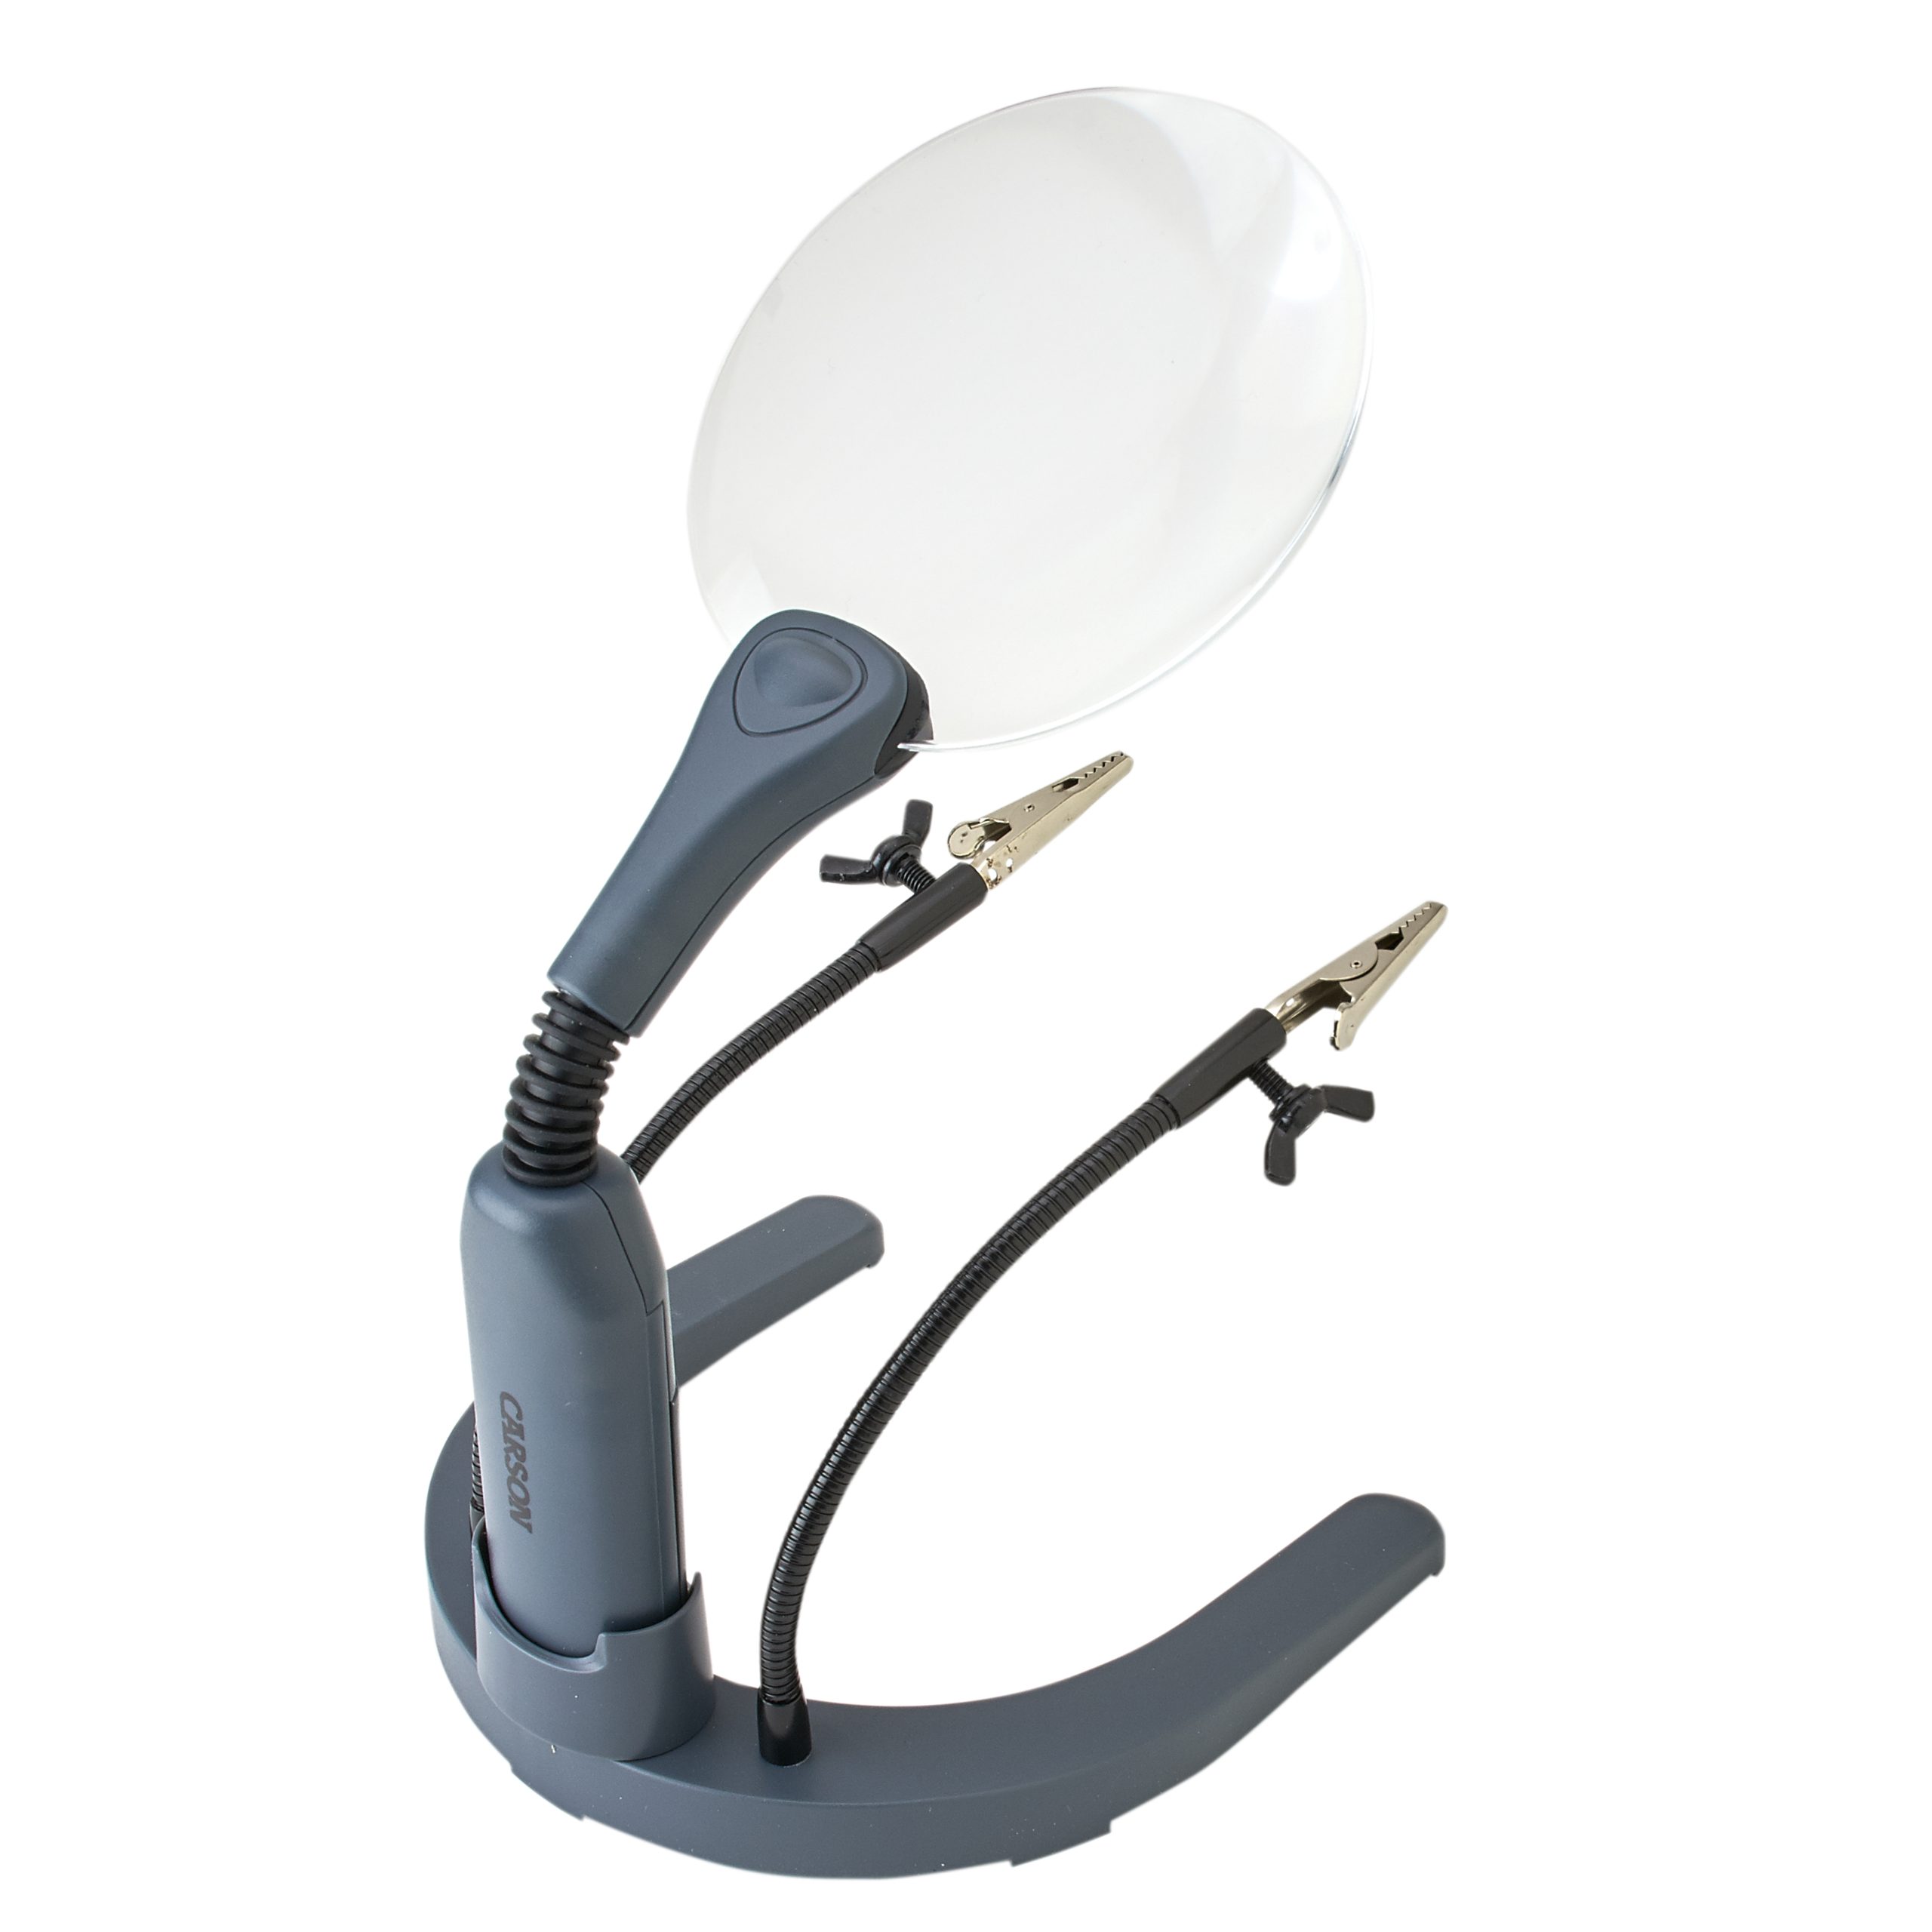 Magnifying Lamp Hands-Free Adjustable Arm Magnifier for Close Work/Reading  J3F8